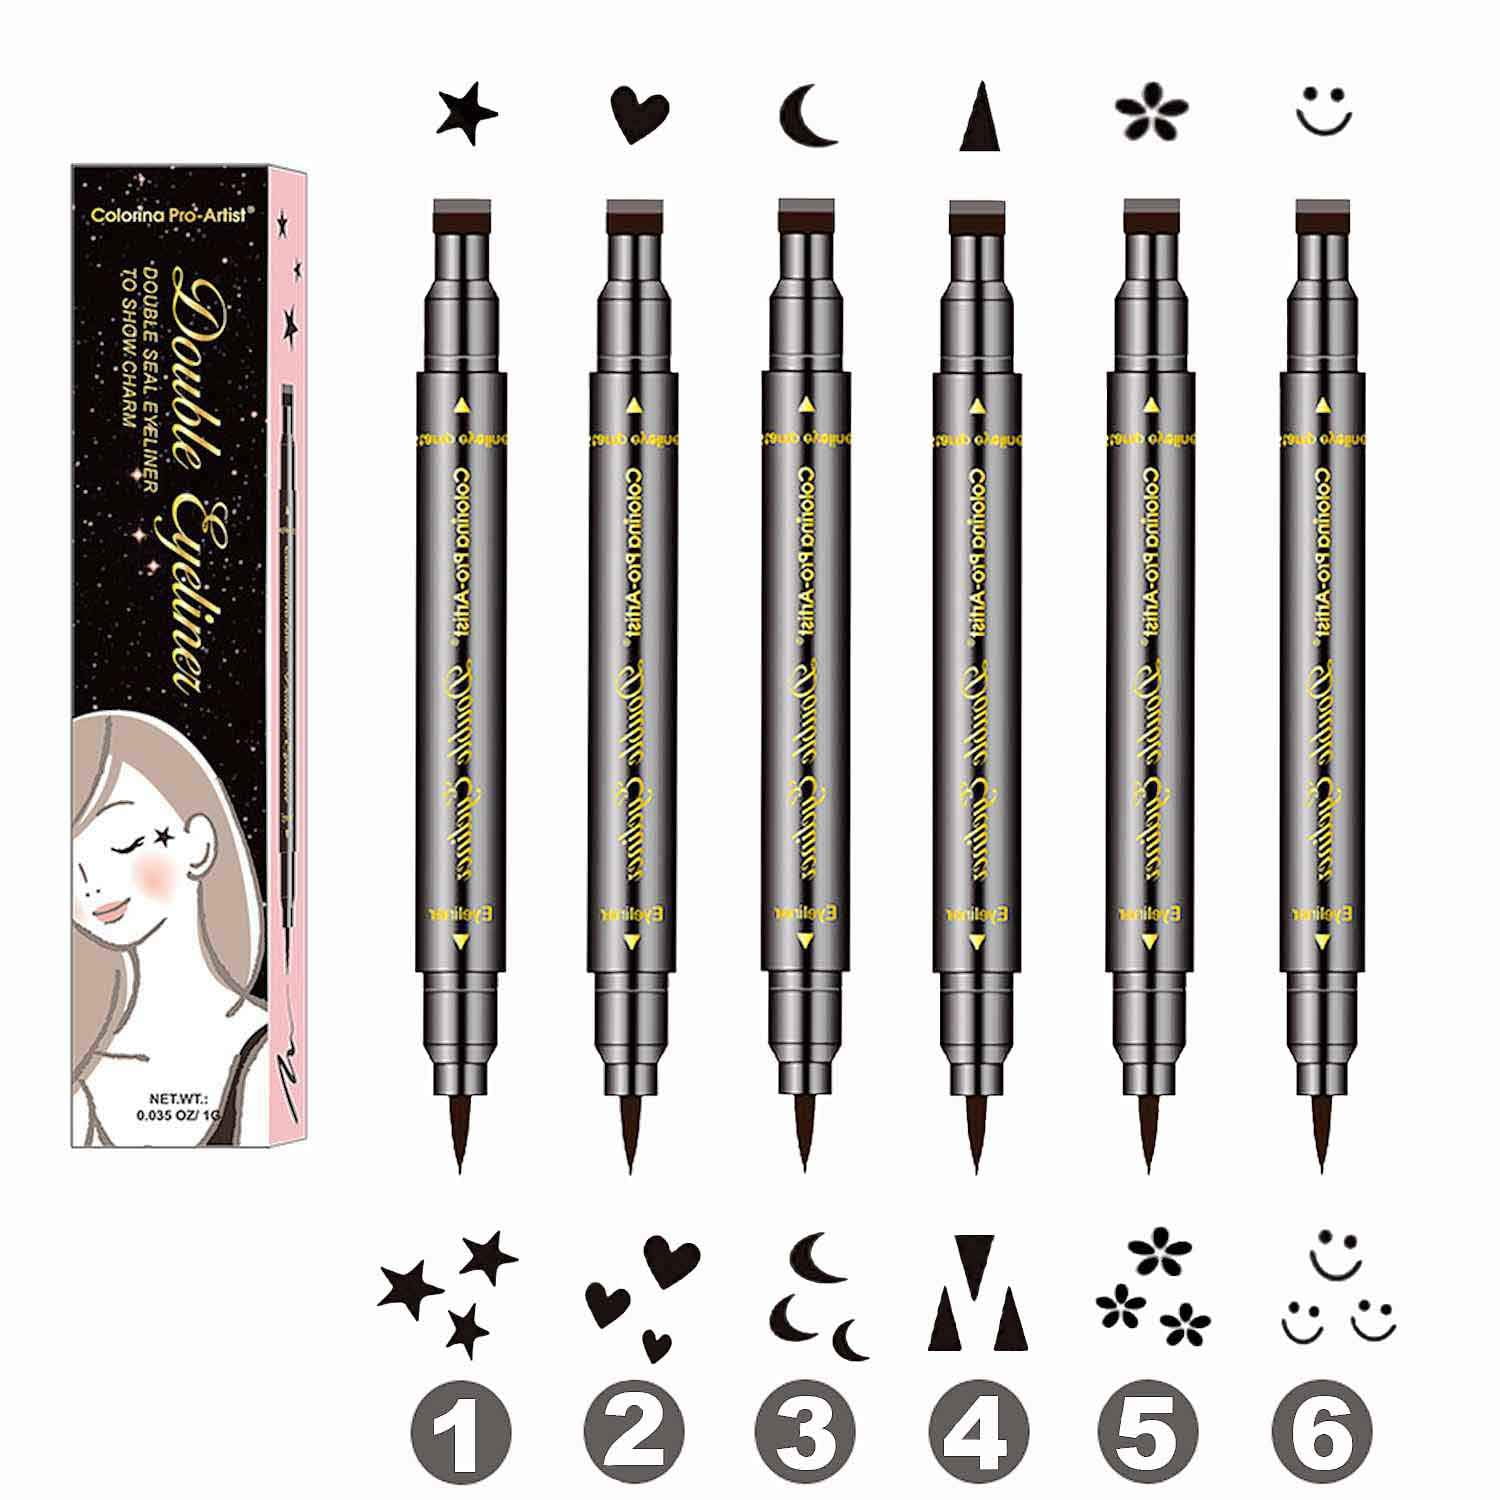 8 Stamper Markers different colours Star, Smiley, Heart Stamp on each pen 